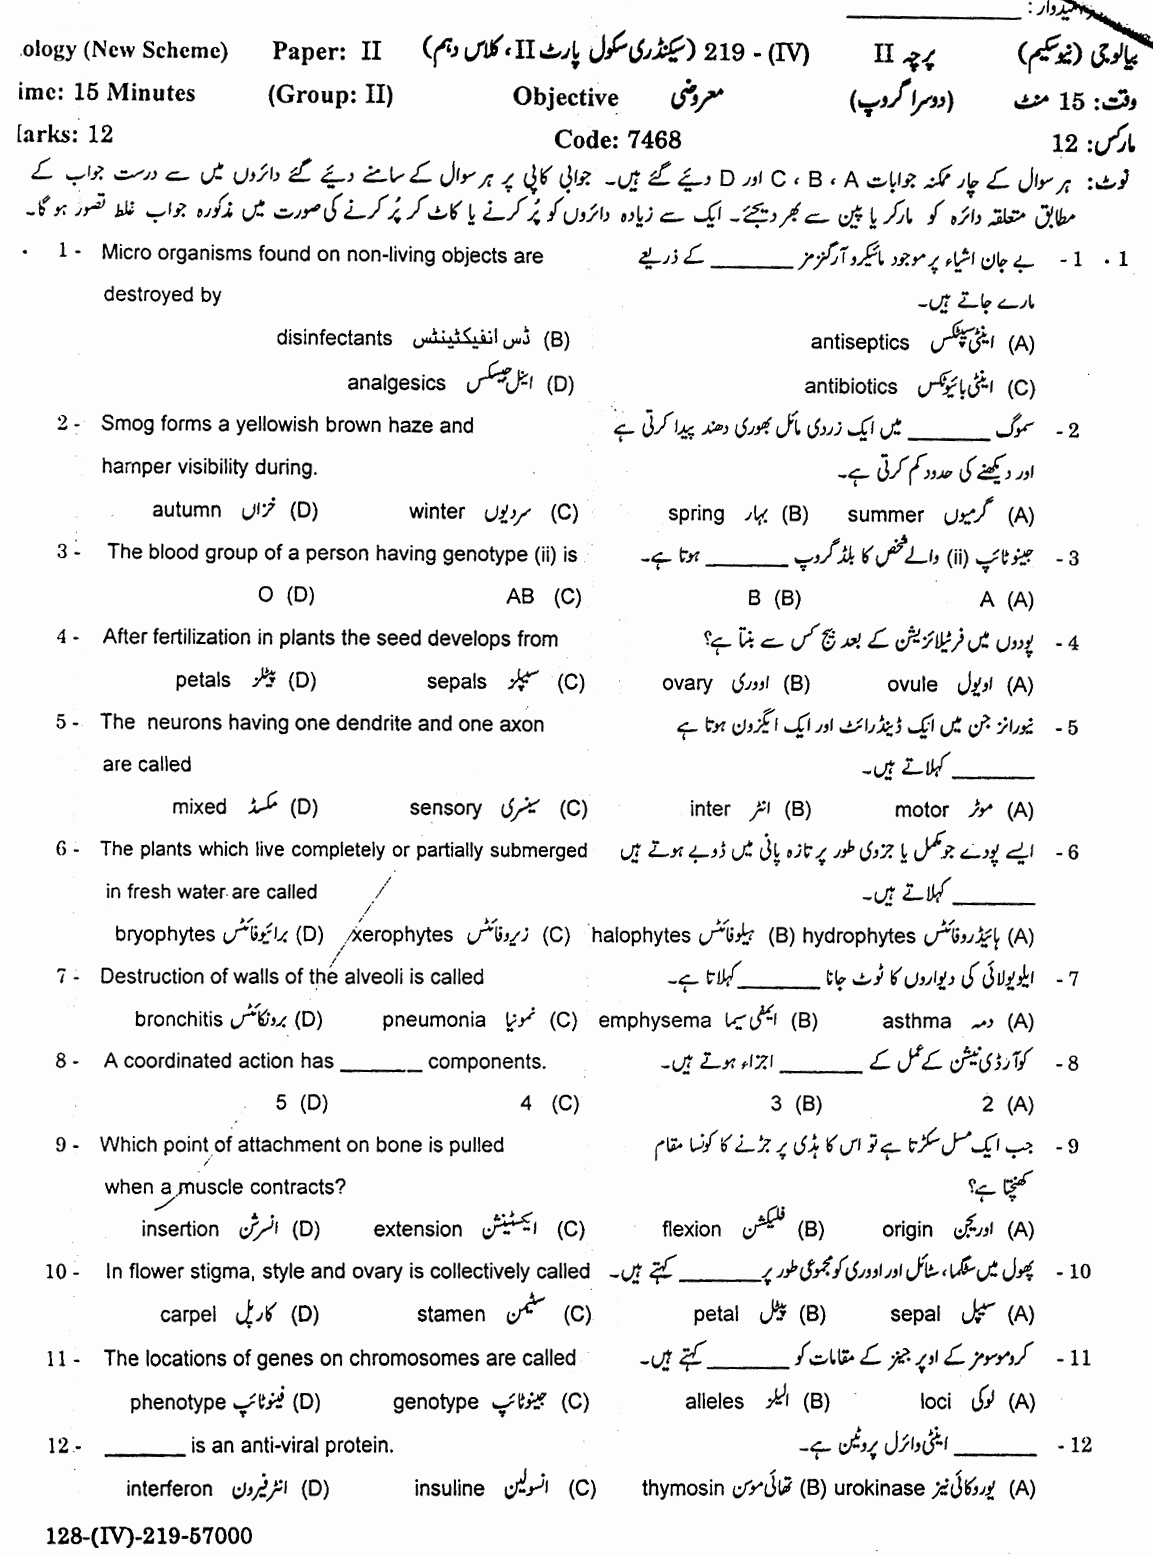 10th Class Biology Paper 2019 Gujranwala Board Objective Group 2